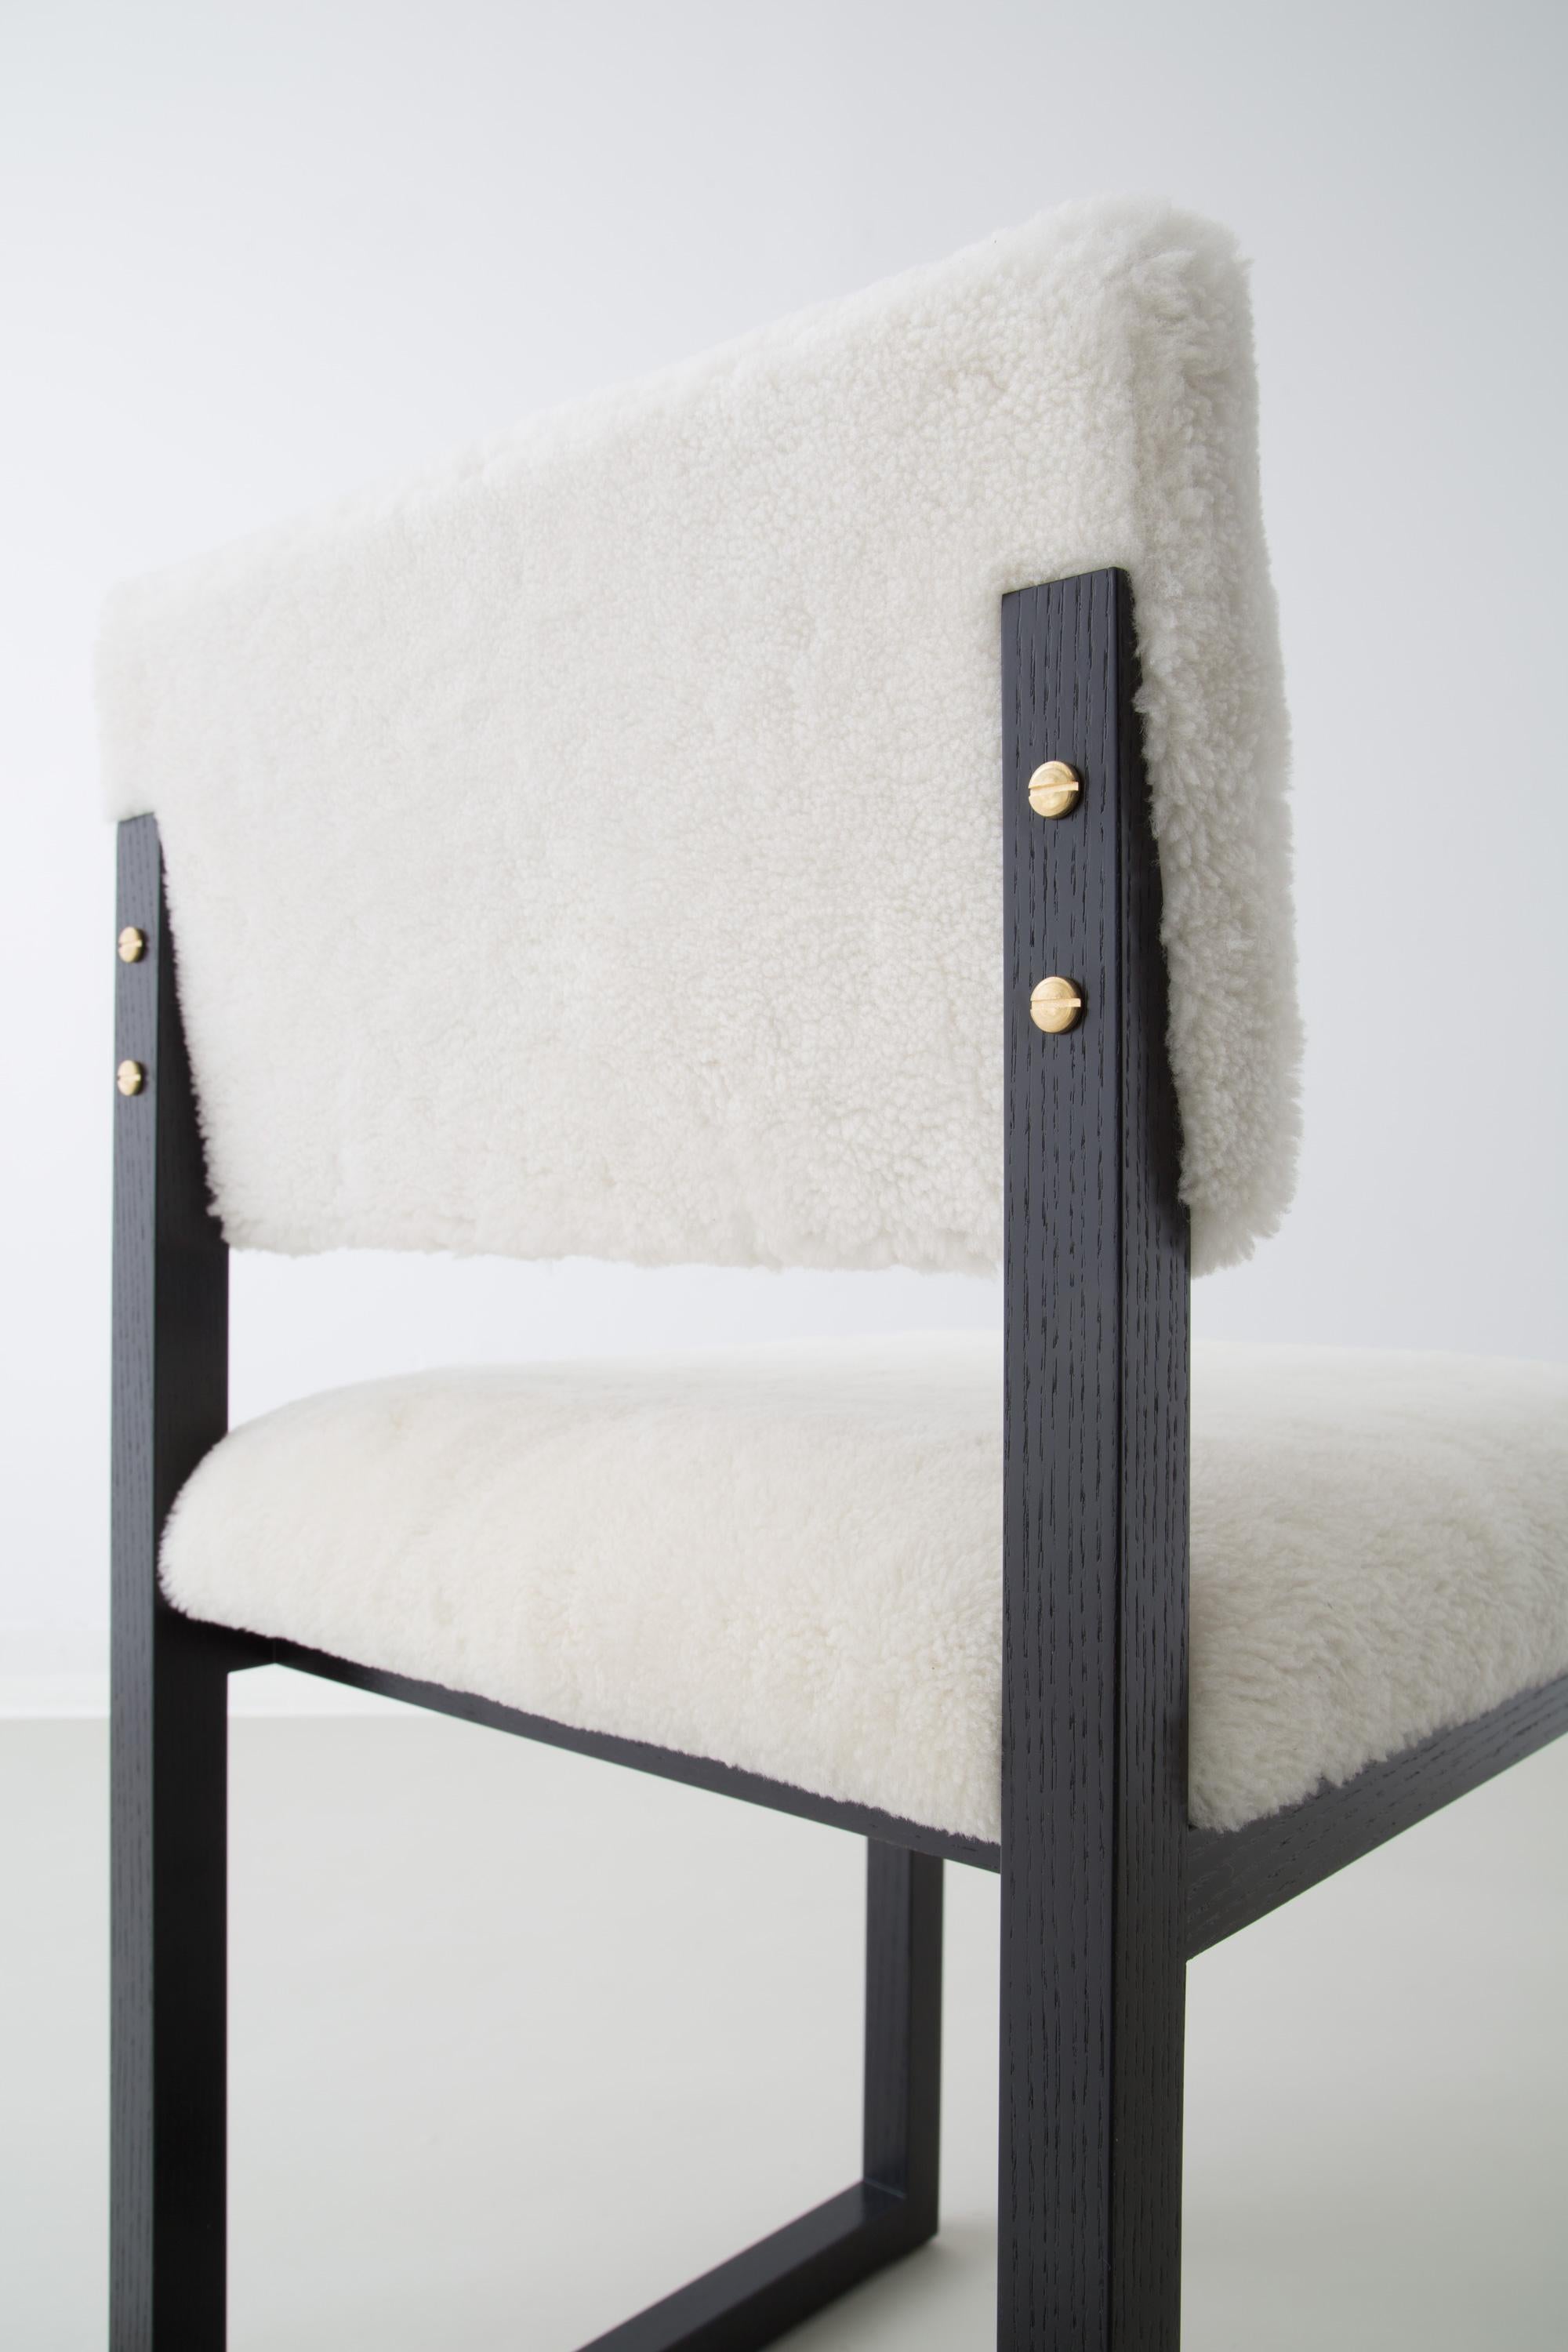 shearling dining chair